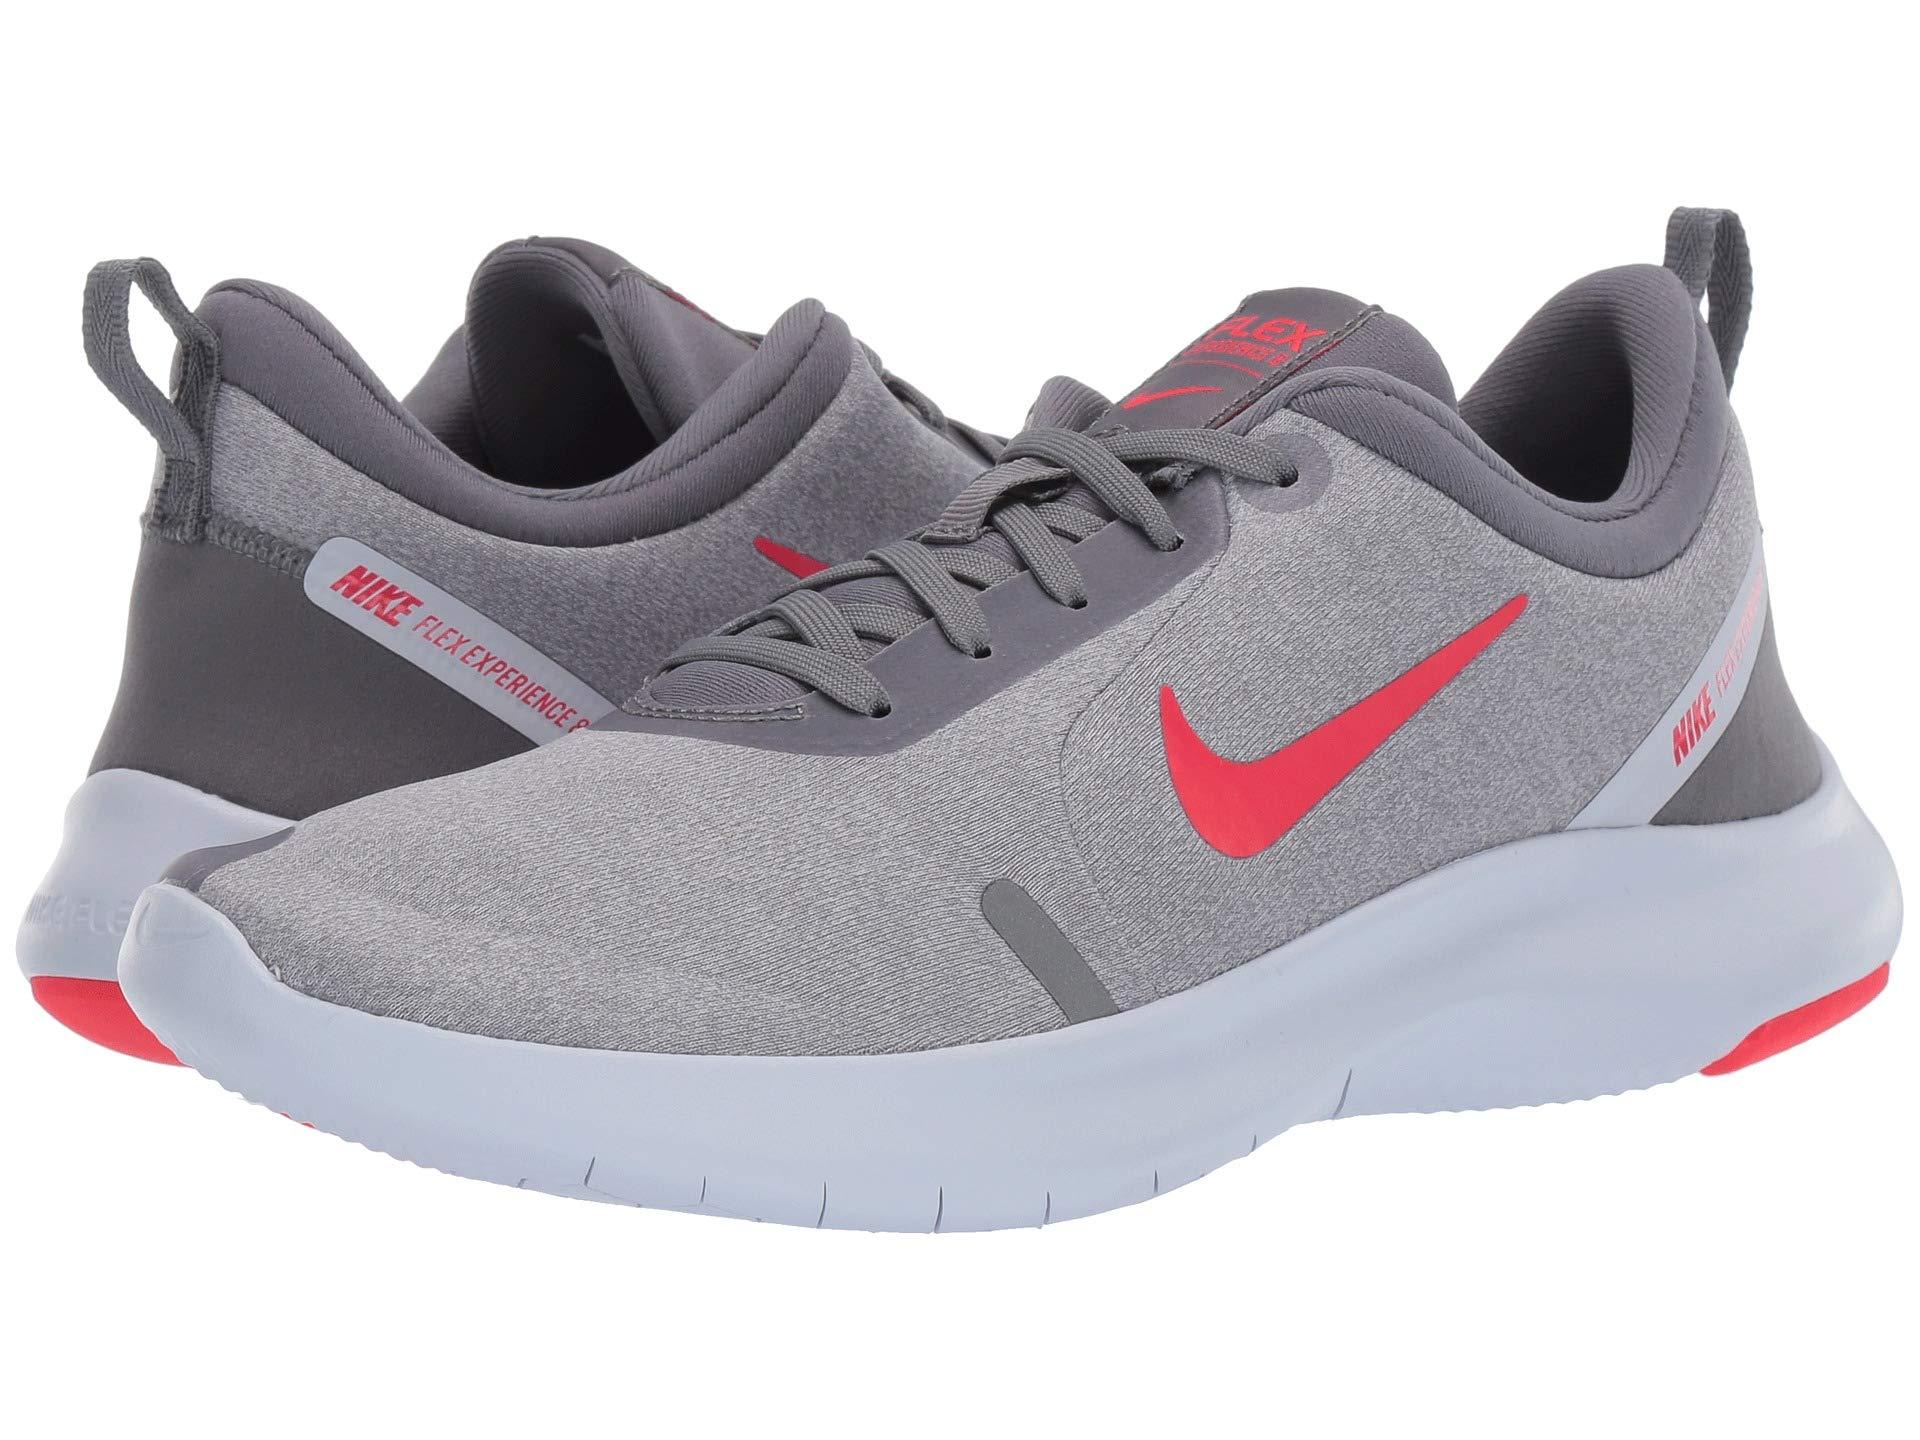 Nike Synthetic Flex Experience Rn 8 Running Shoe In Platinumpink Gray Save 36 Lyst